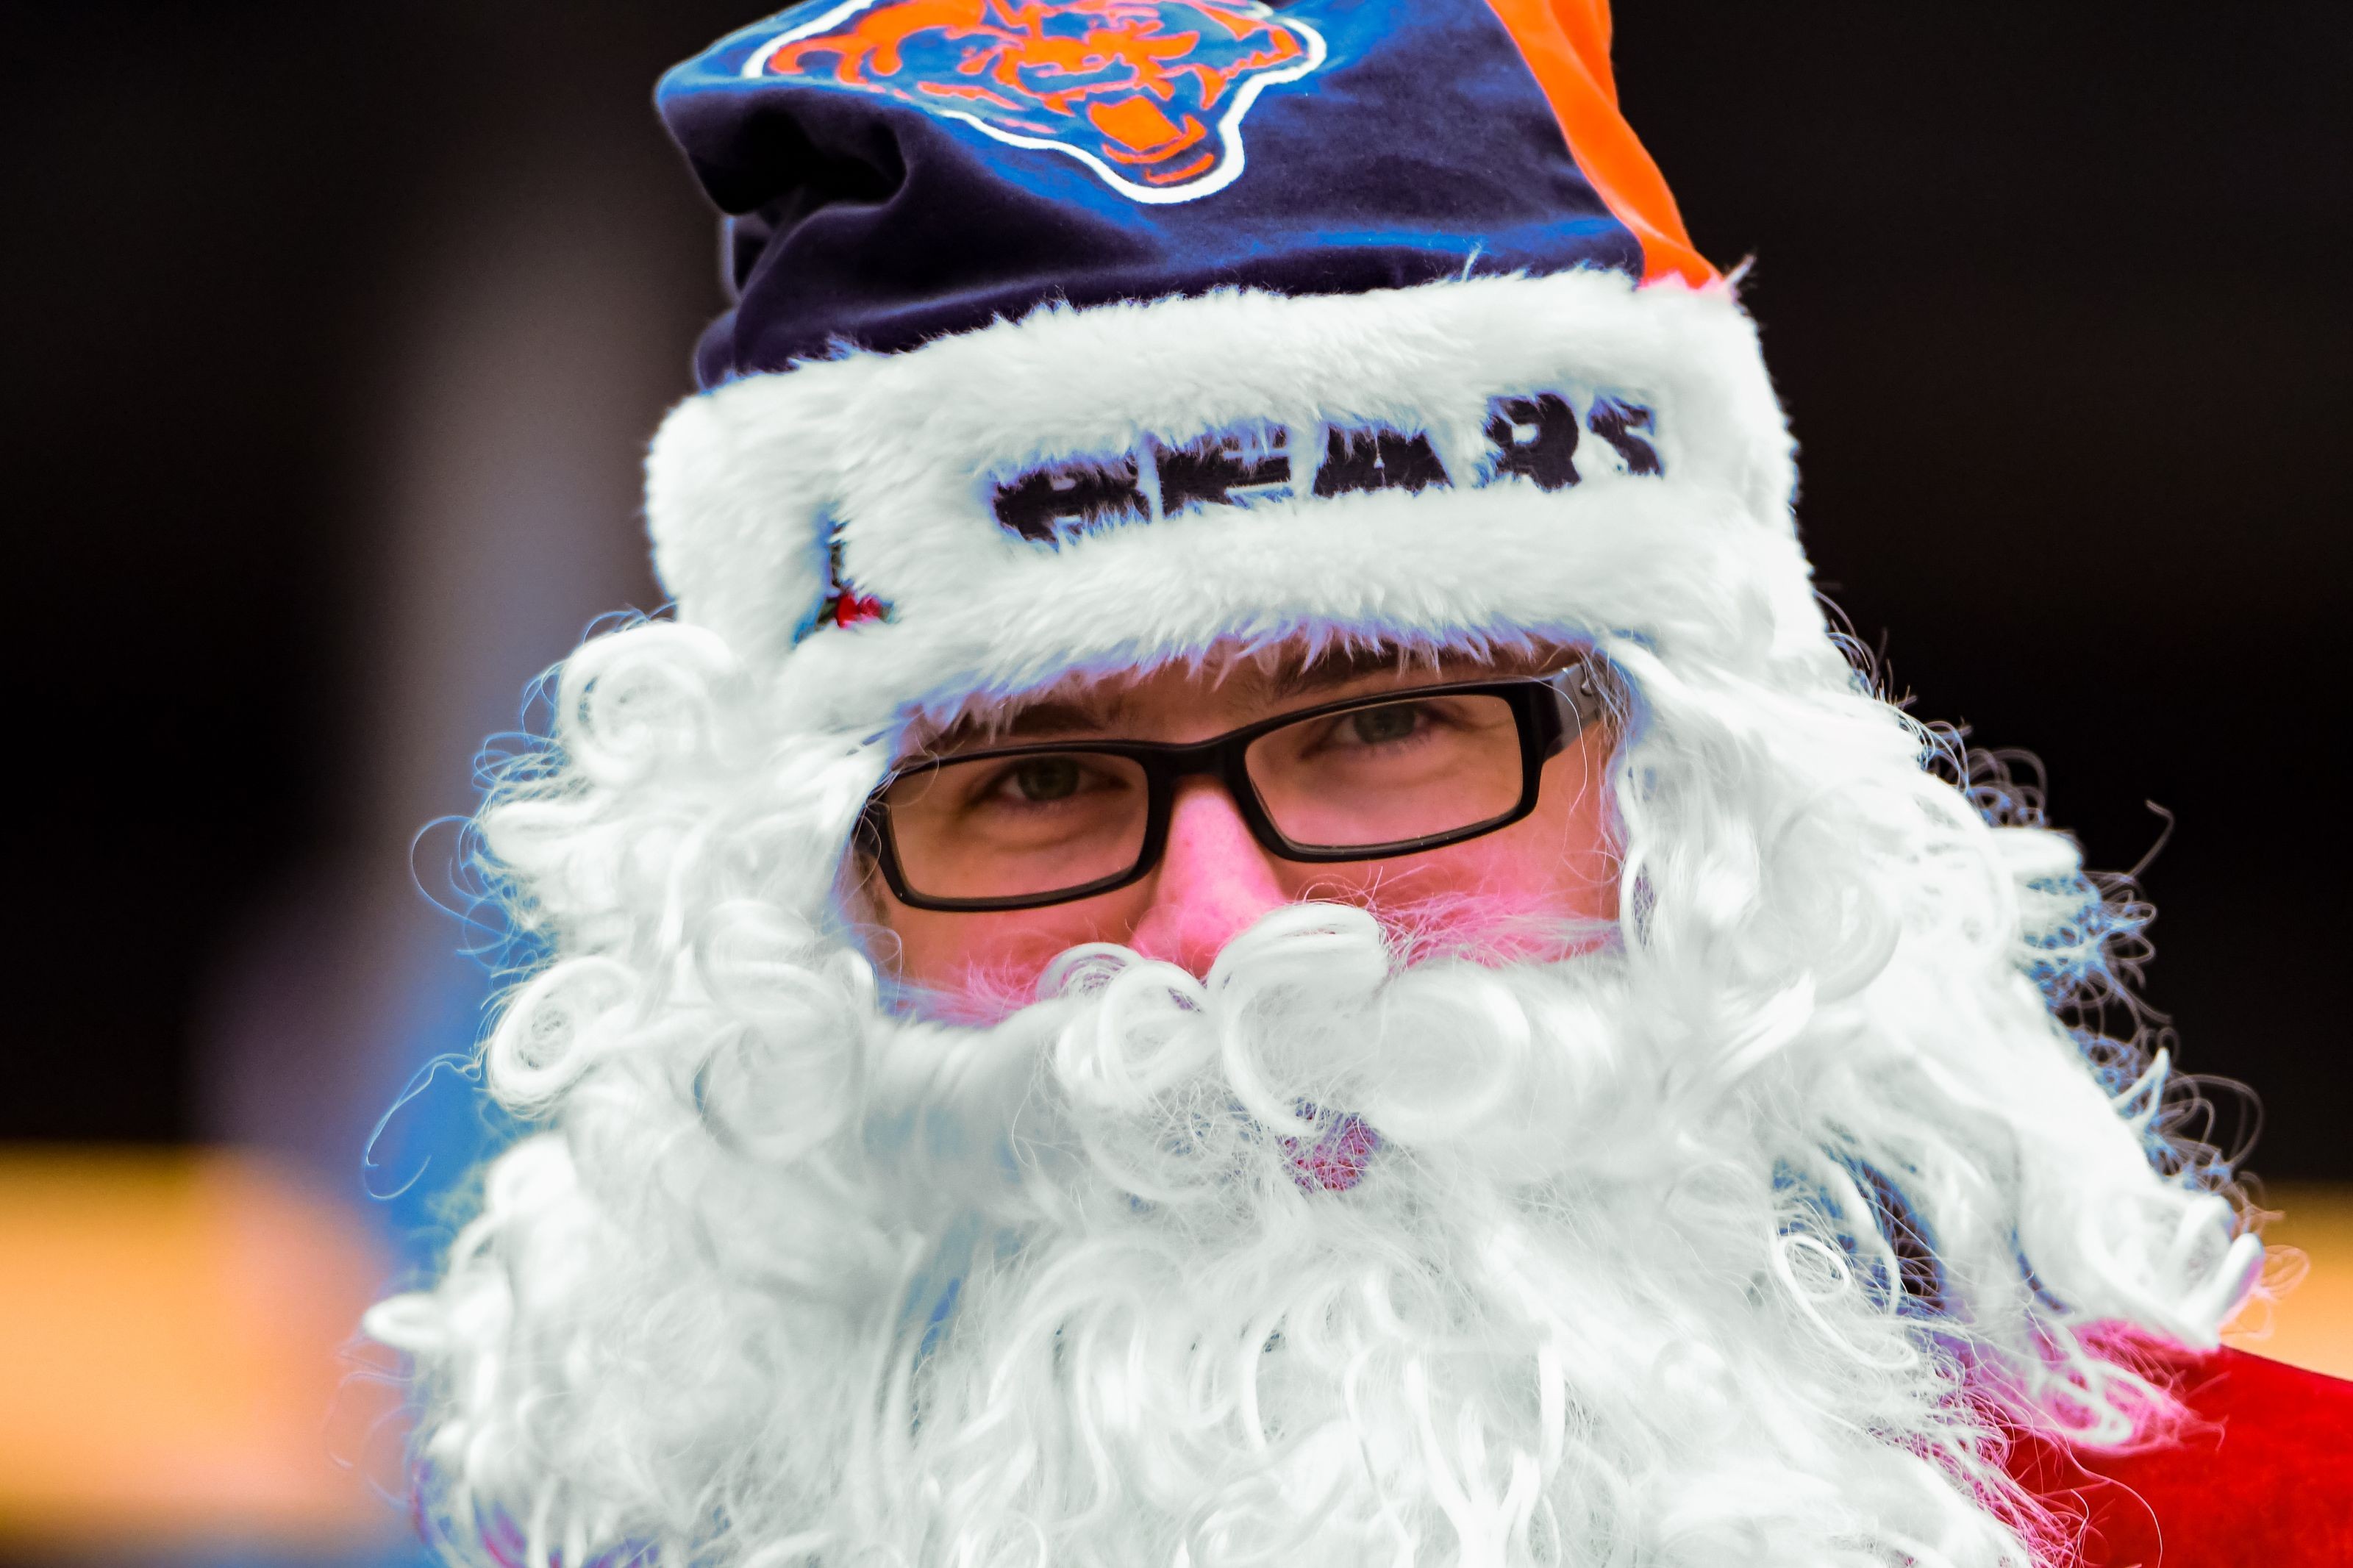 5 Christmas gifts for Chicago Bears